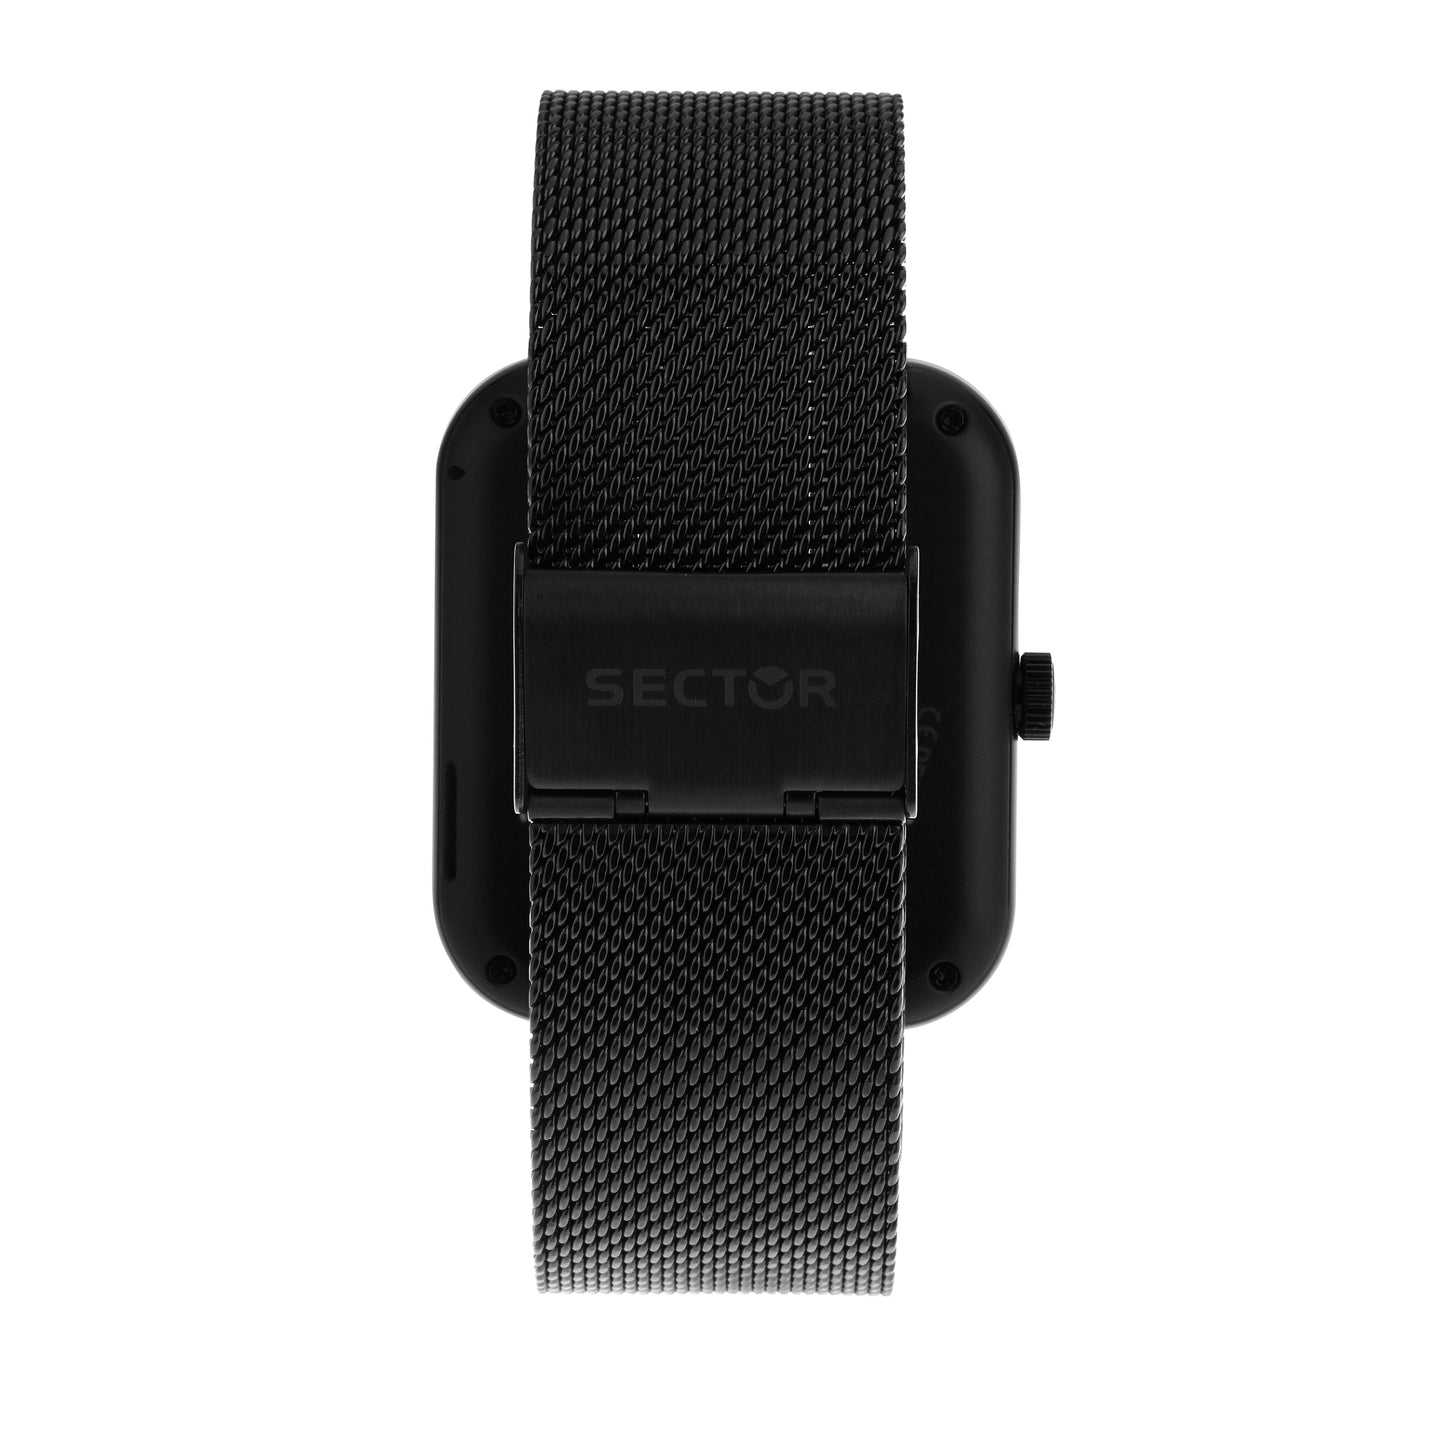 SMARTWATCH MAN SECTOR S-03 WR 3ATM R3253294002